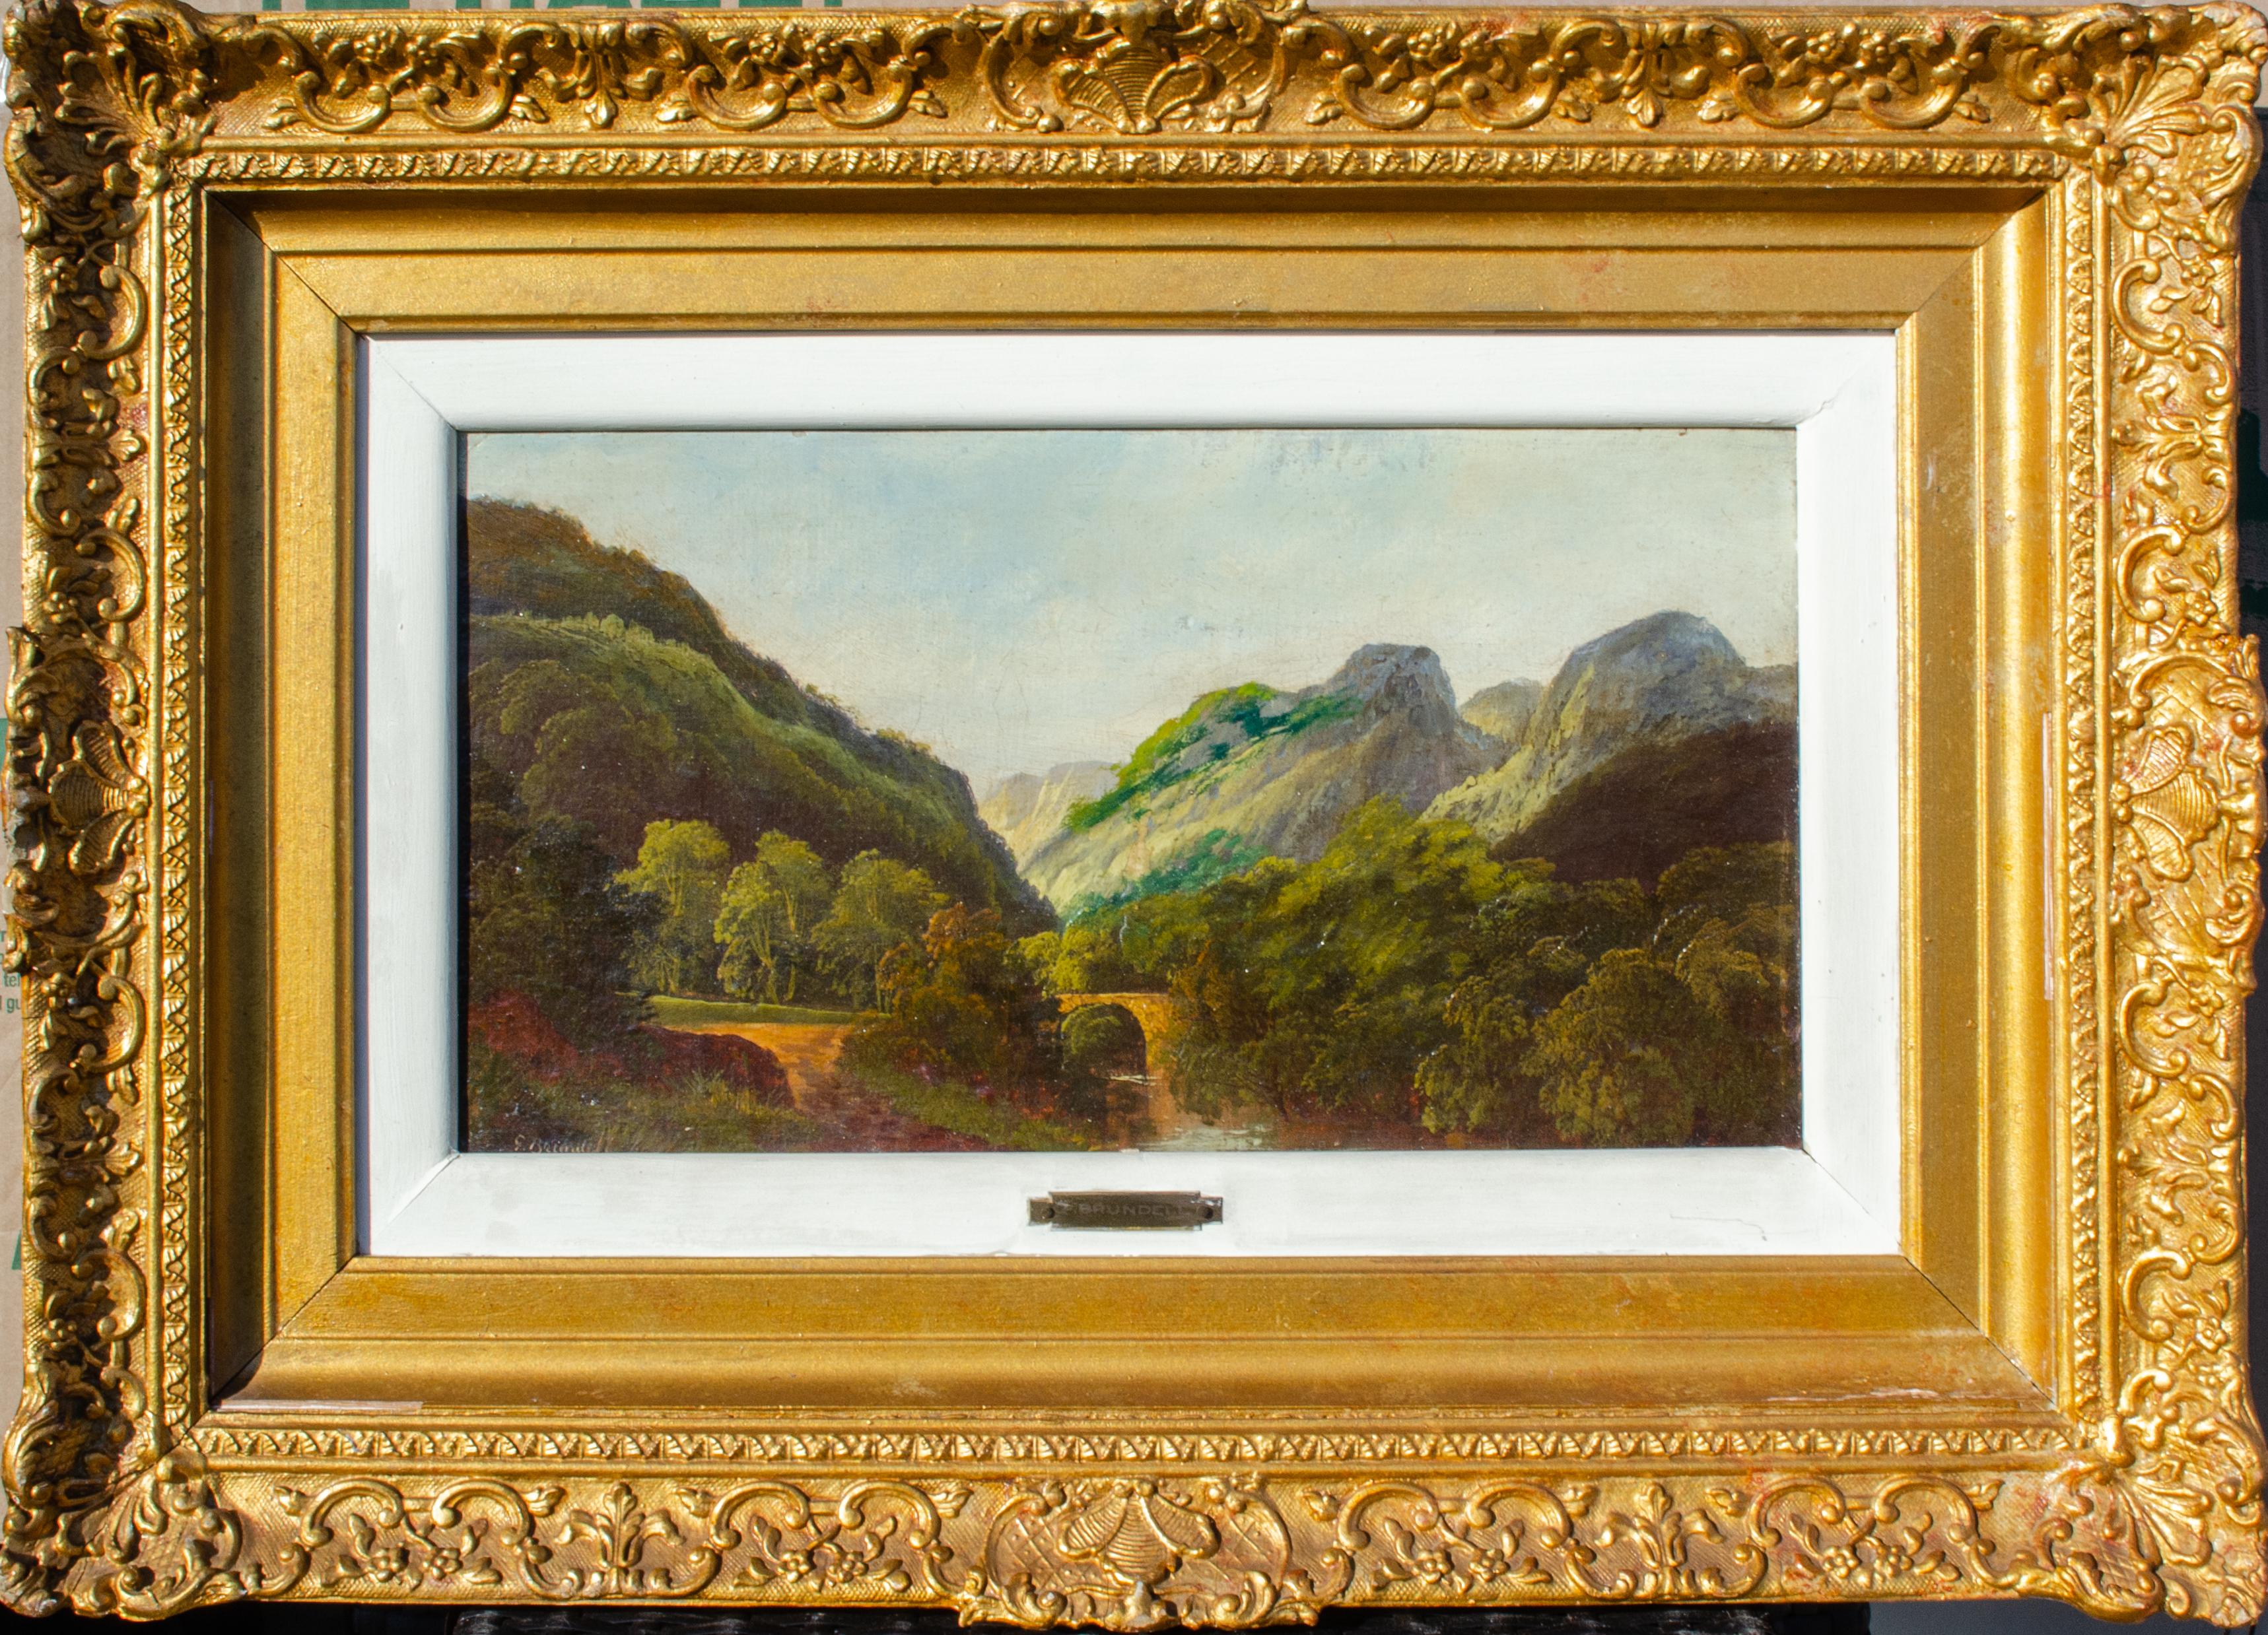 G. Brundell
Untitled, c. Early 20th Century
Oil on canvas
Sight: 10 x 18 in.
Framed: 19 7/8 x 27 7/8 x 2 in.
Signed lower left
